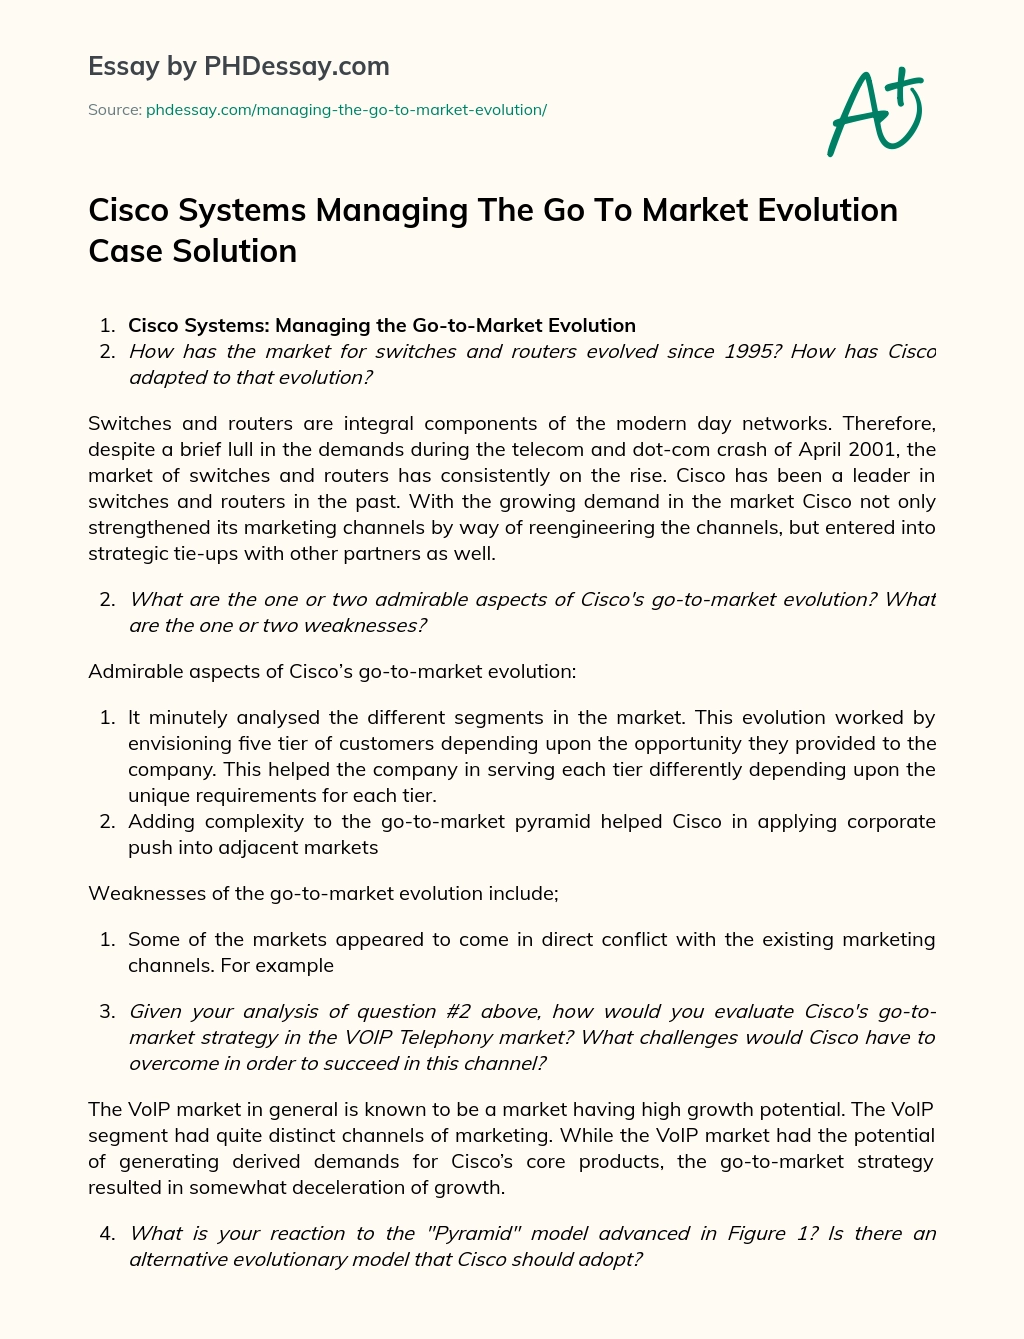 Cisco Systems Managing The Go To Market Evolution Case Solution essay